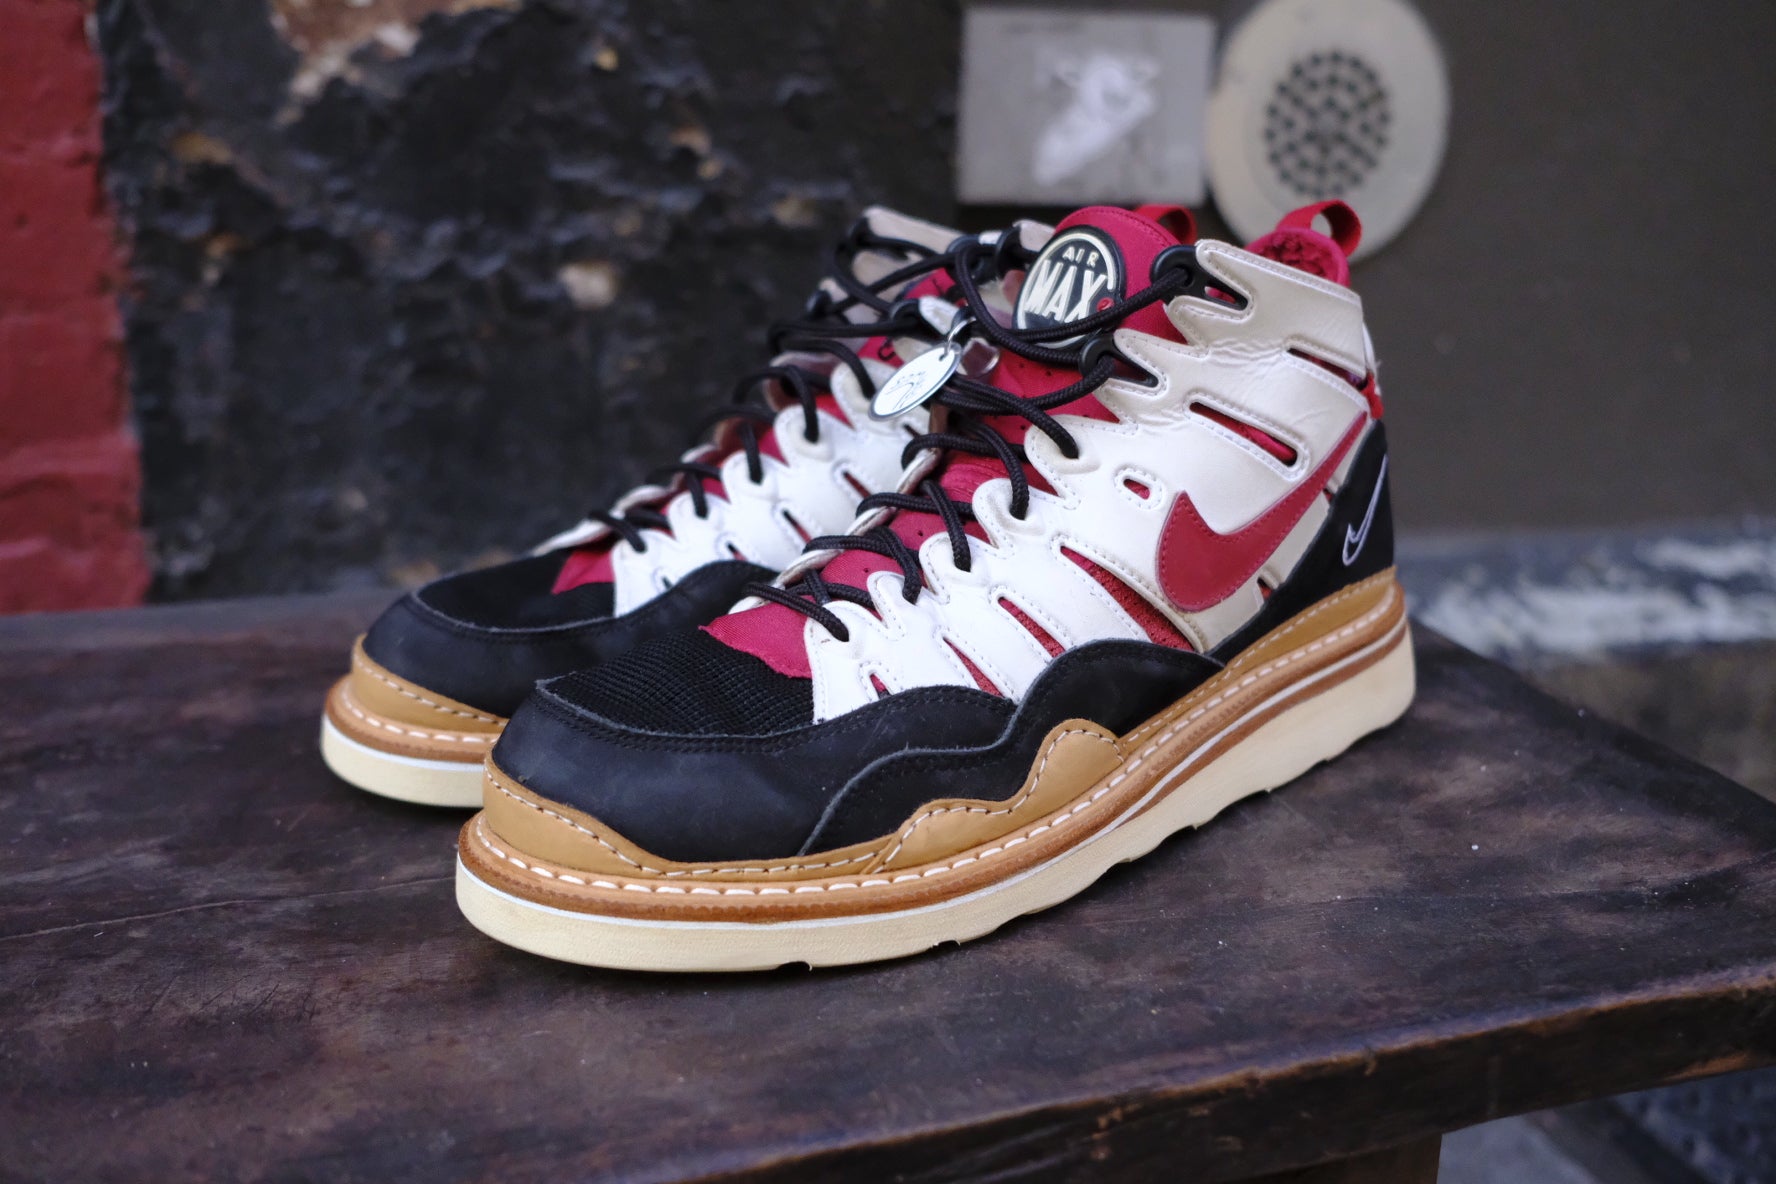 reconstructed nike air trainer max 94 - m us 11